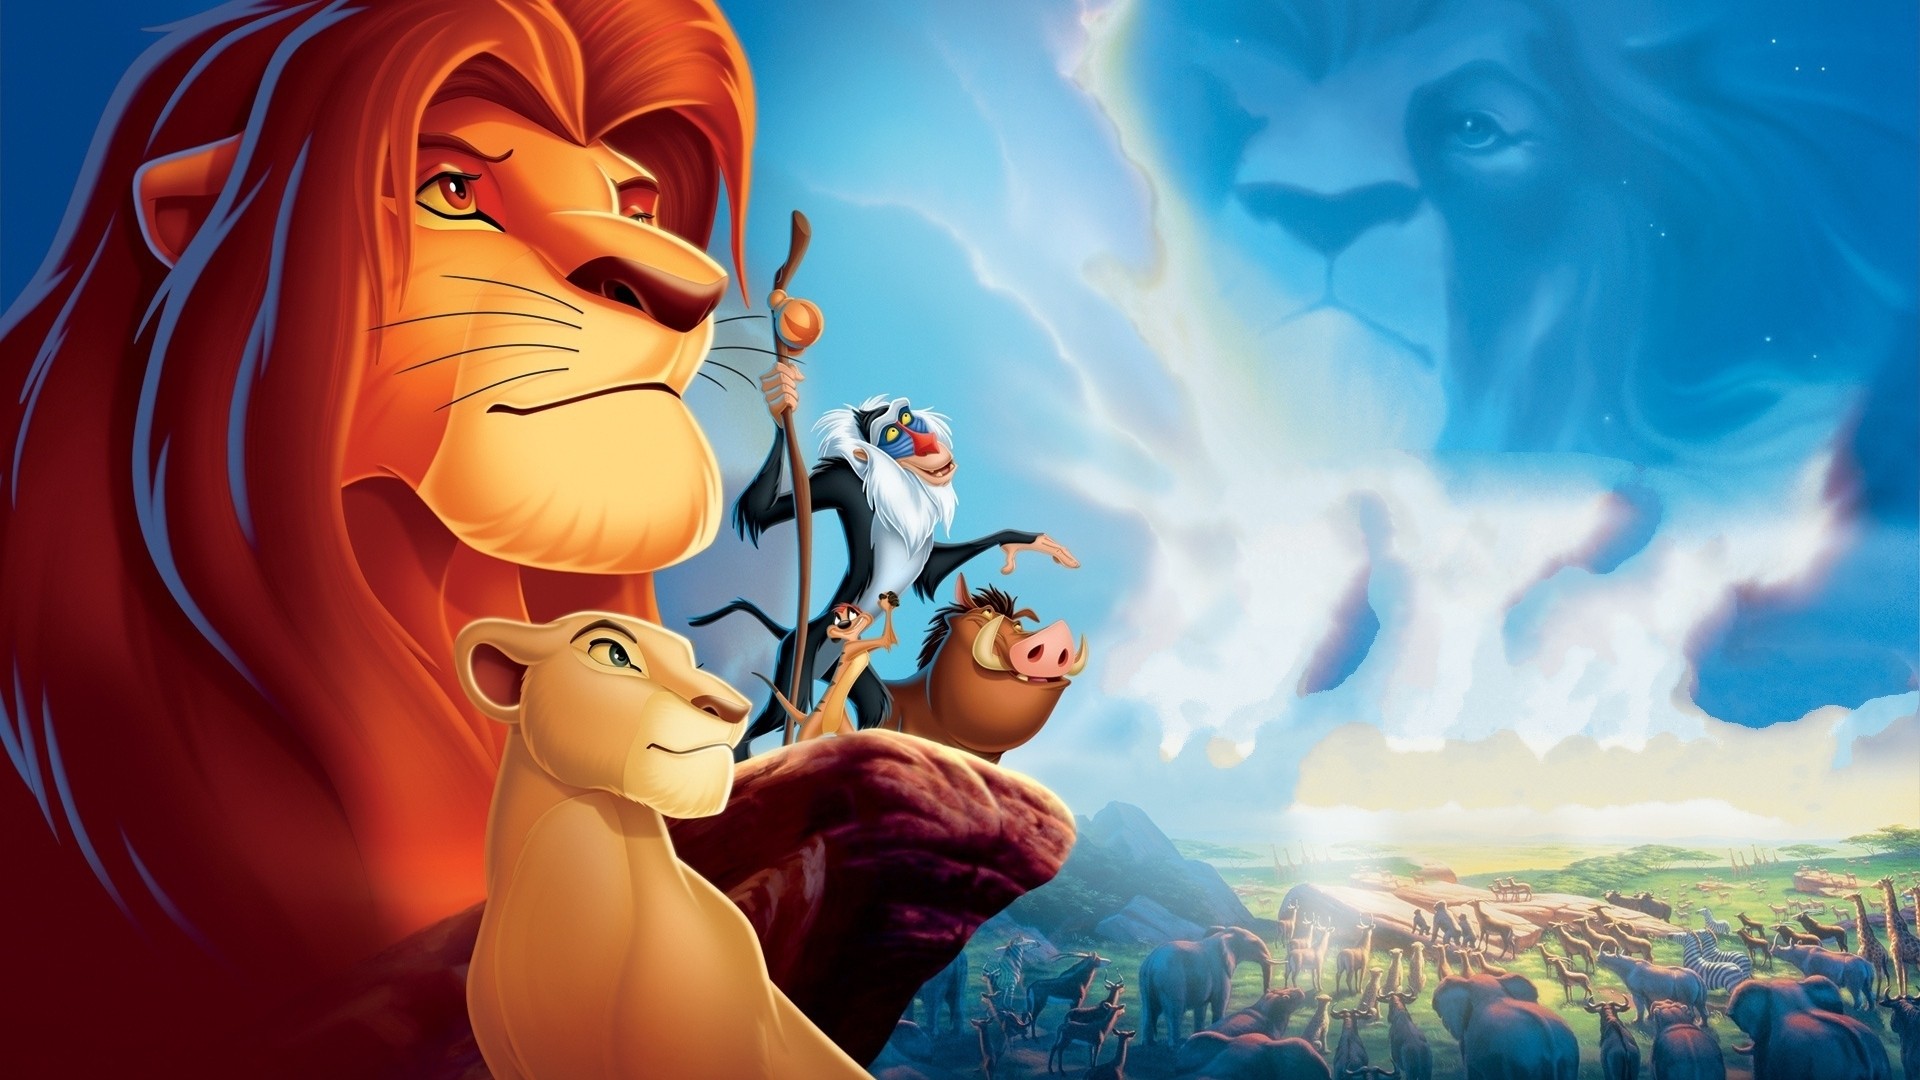 The-Lion-King-the-lion-king-32779773-1920-1080